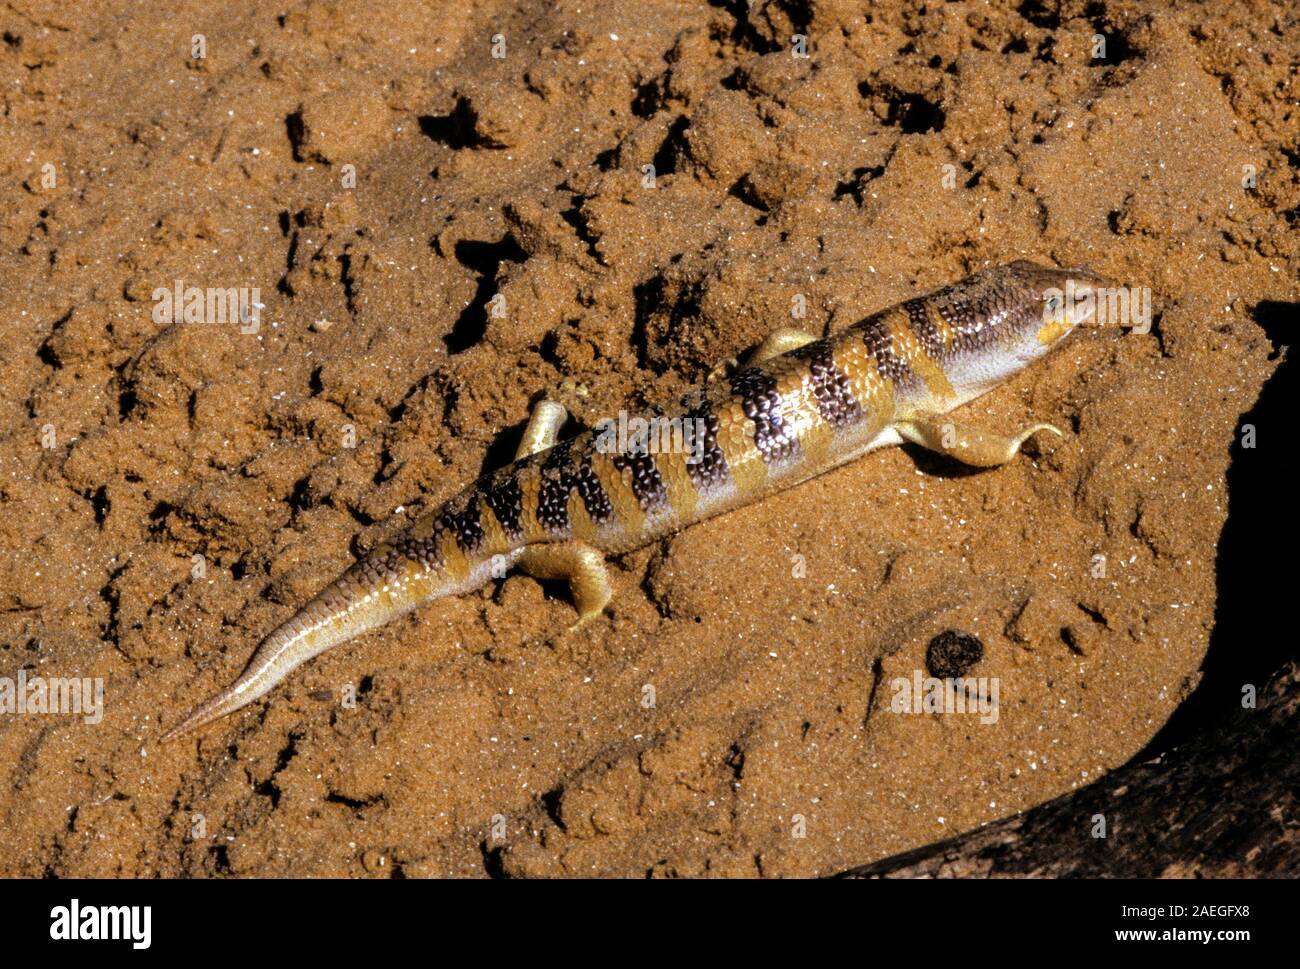 Sandfish (Scincus scincus) is a species of skink that burrows into the sand and swims through it. It is native to north Africa and southwestern Asia. Stock Photo